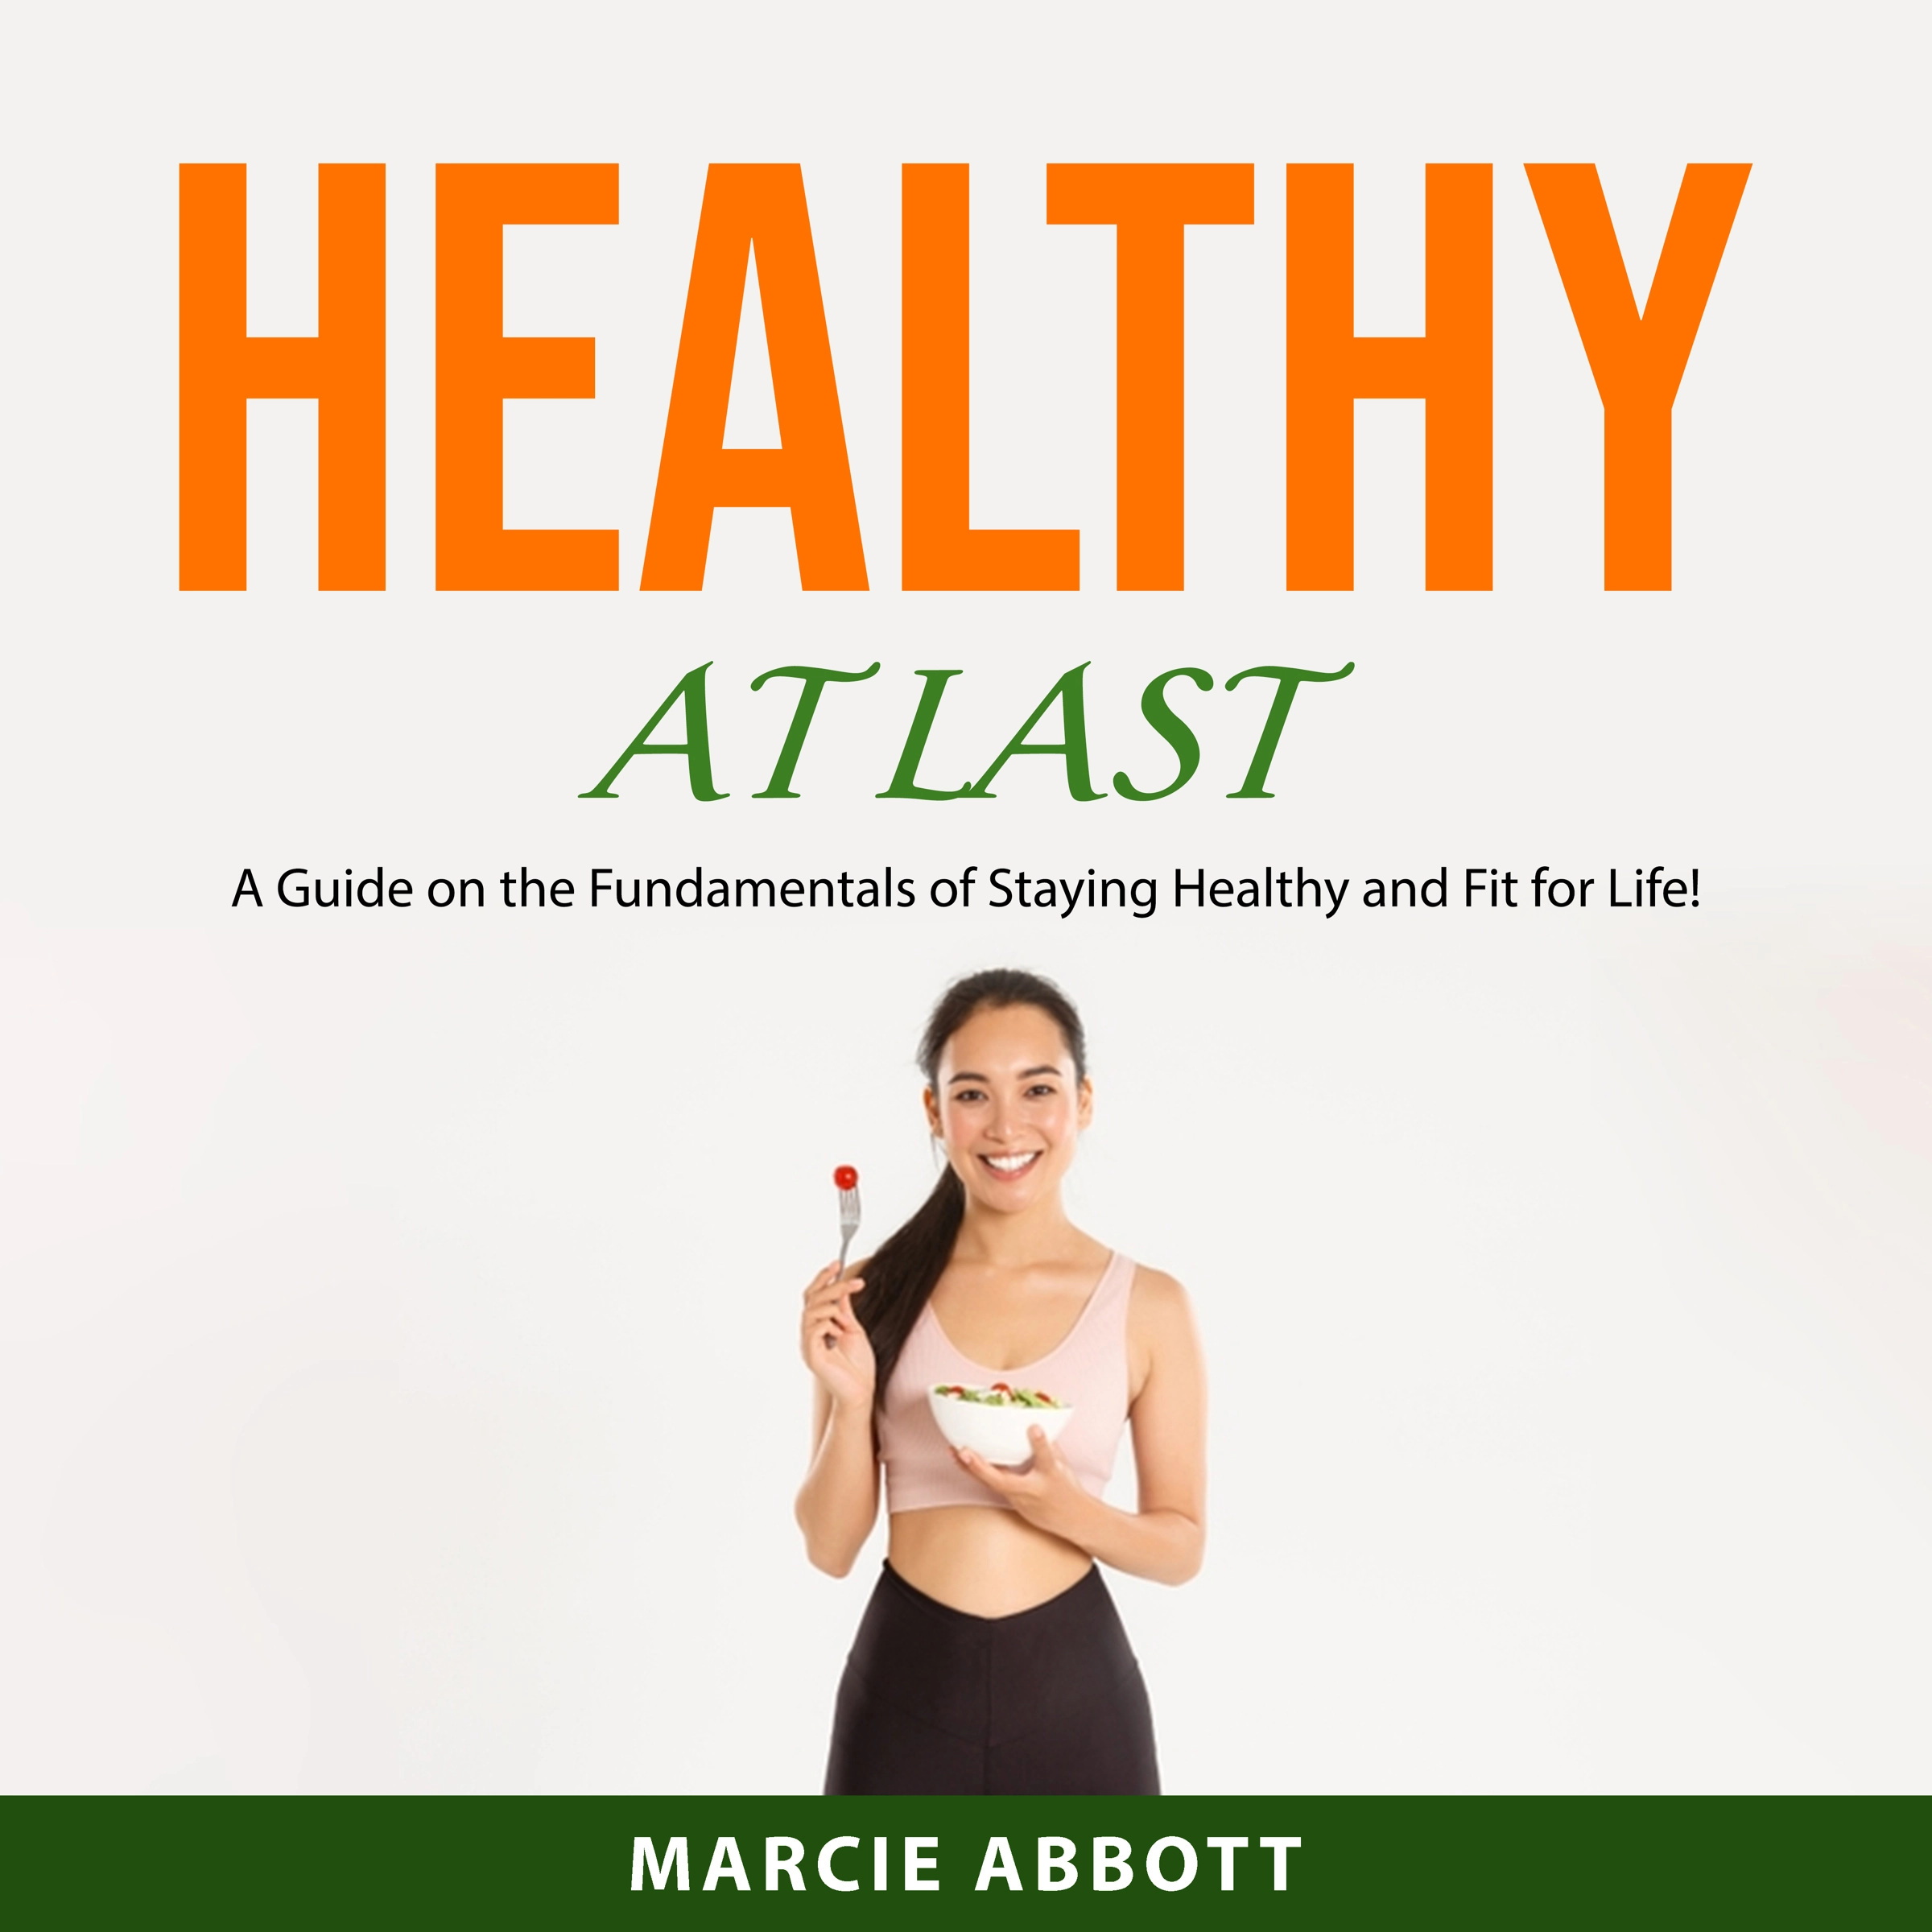 Healthy at Last Audiobook by Marcie Abbott